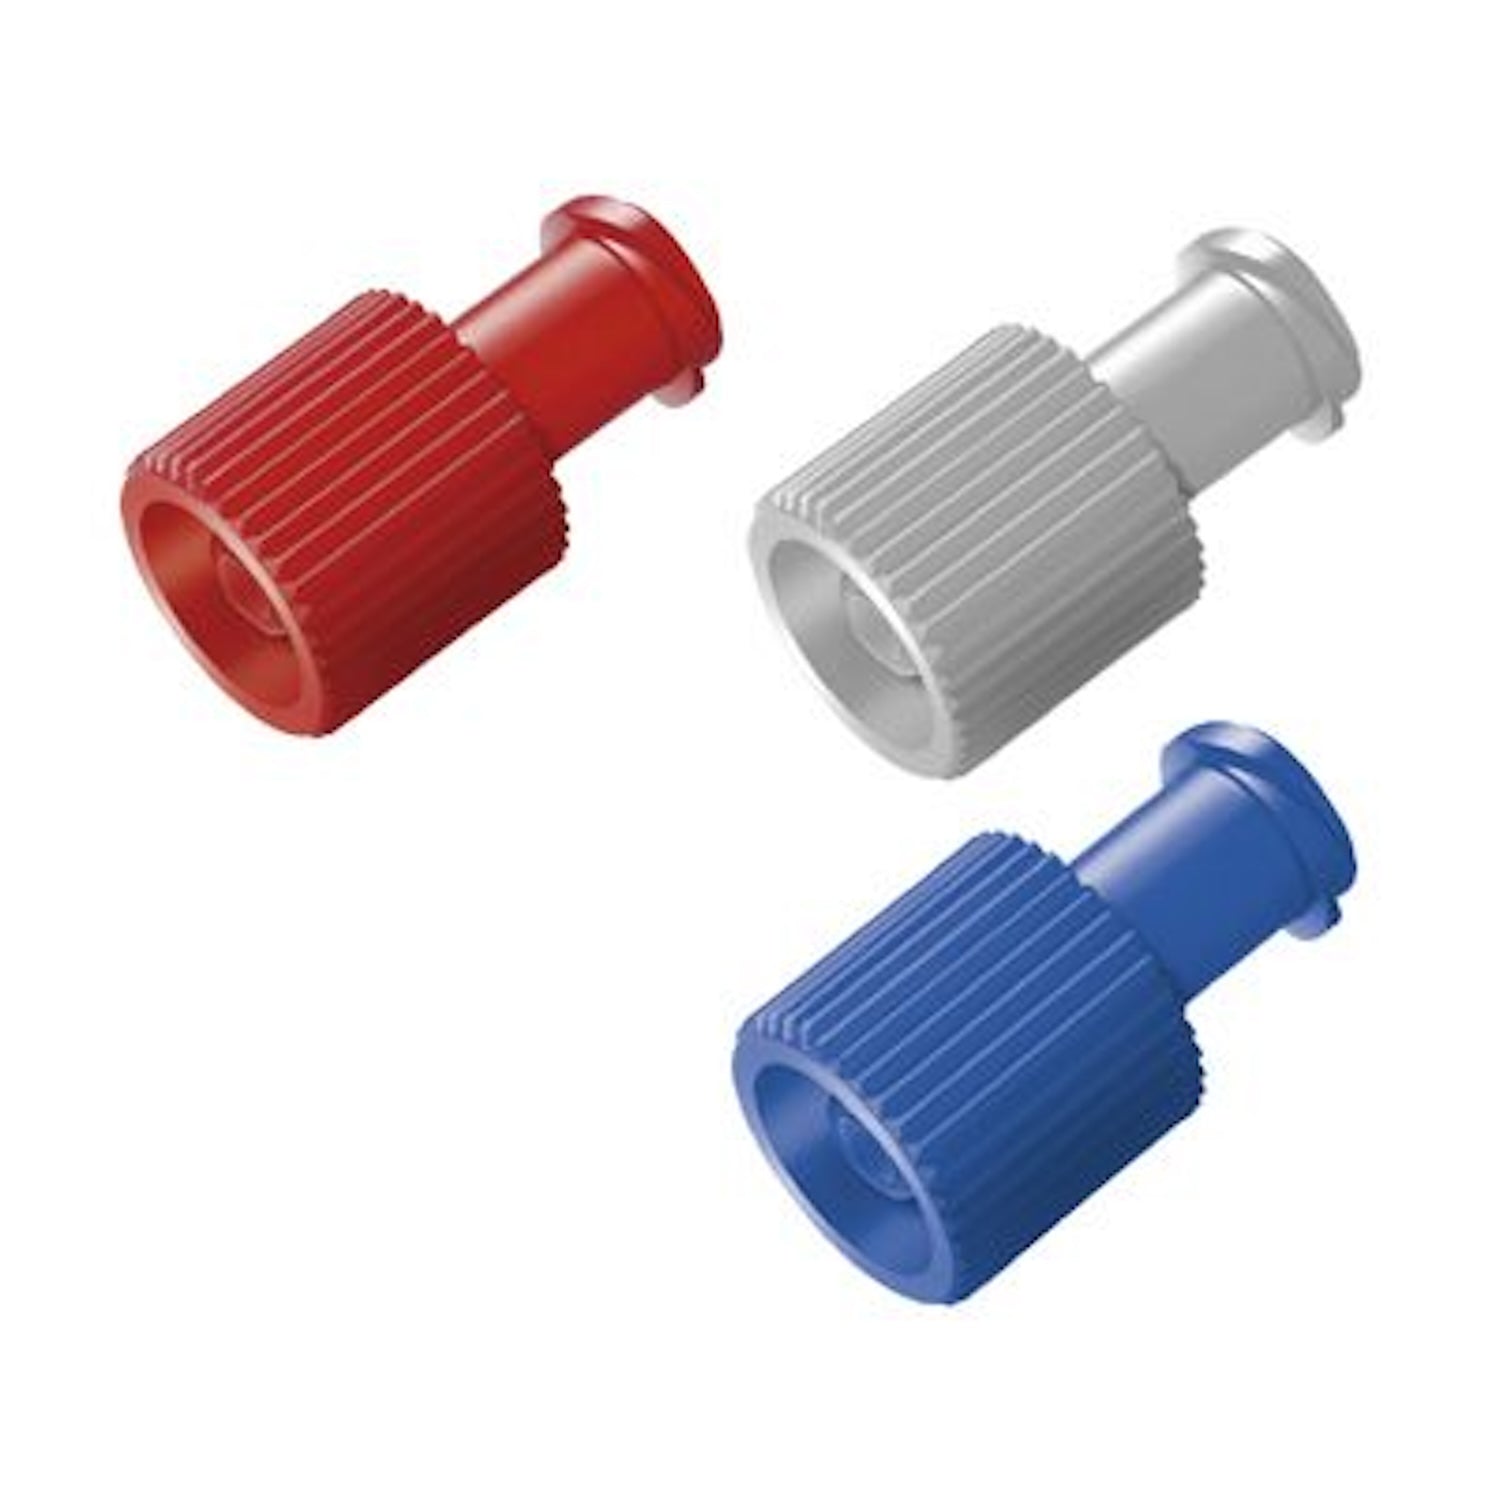 Closing cones | Luer Lock fitting male and female | Pack of 100